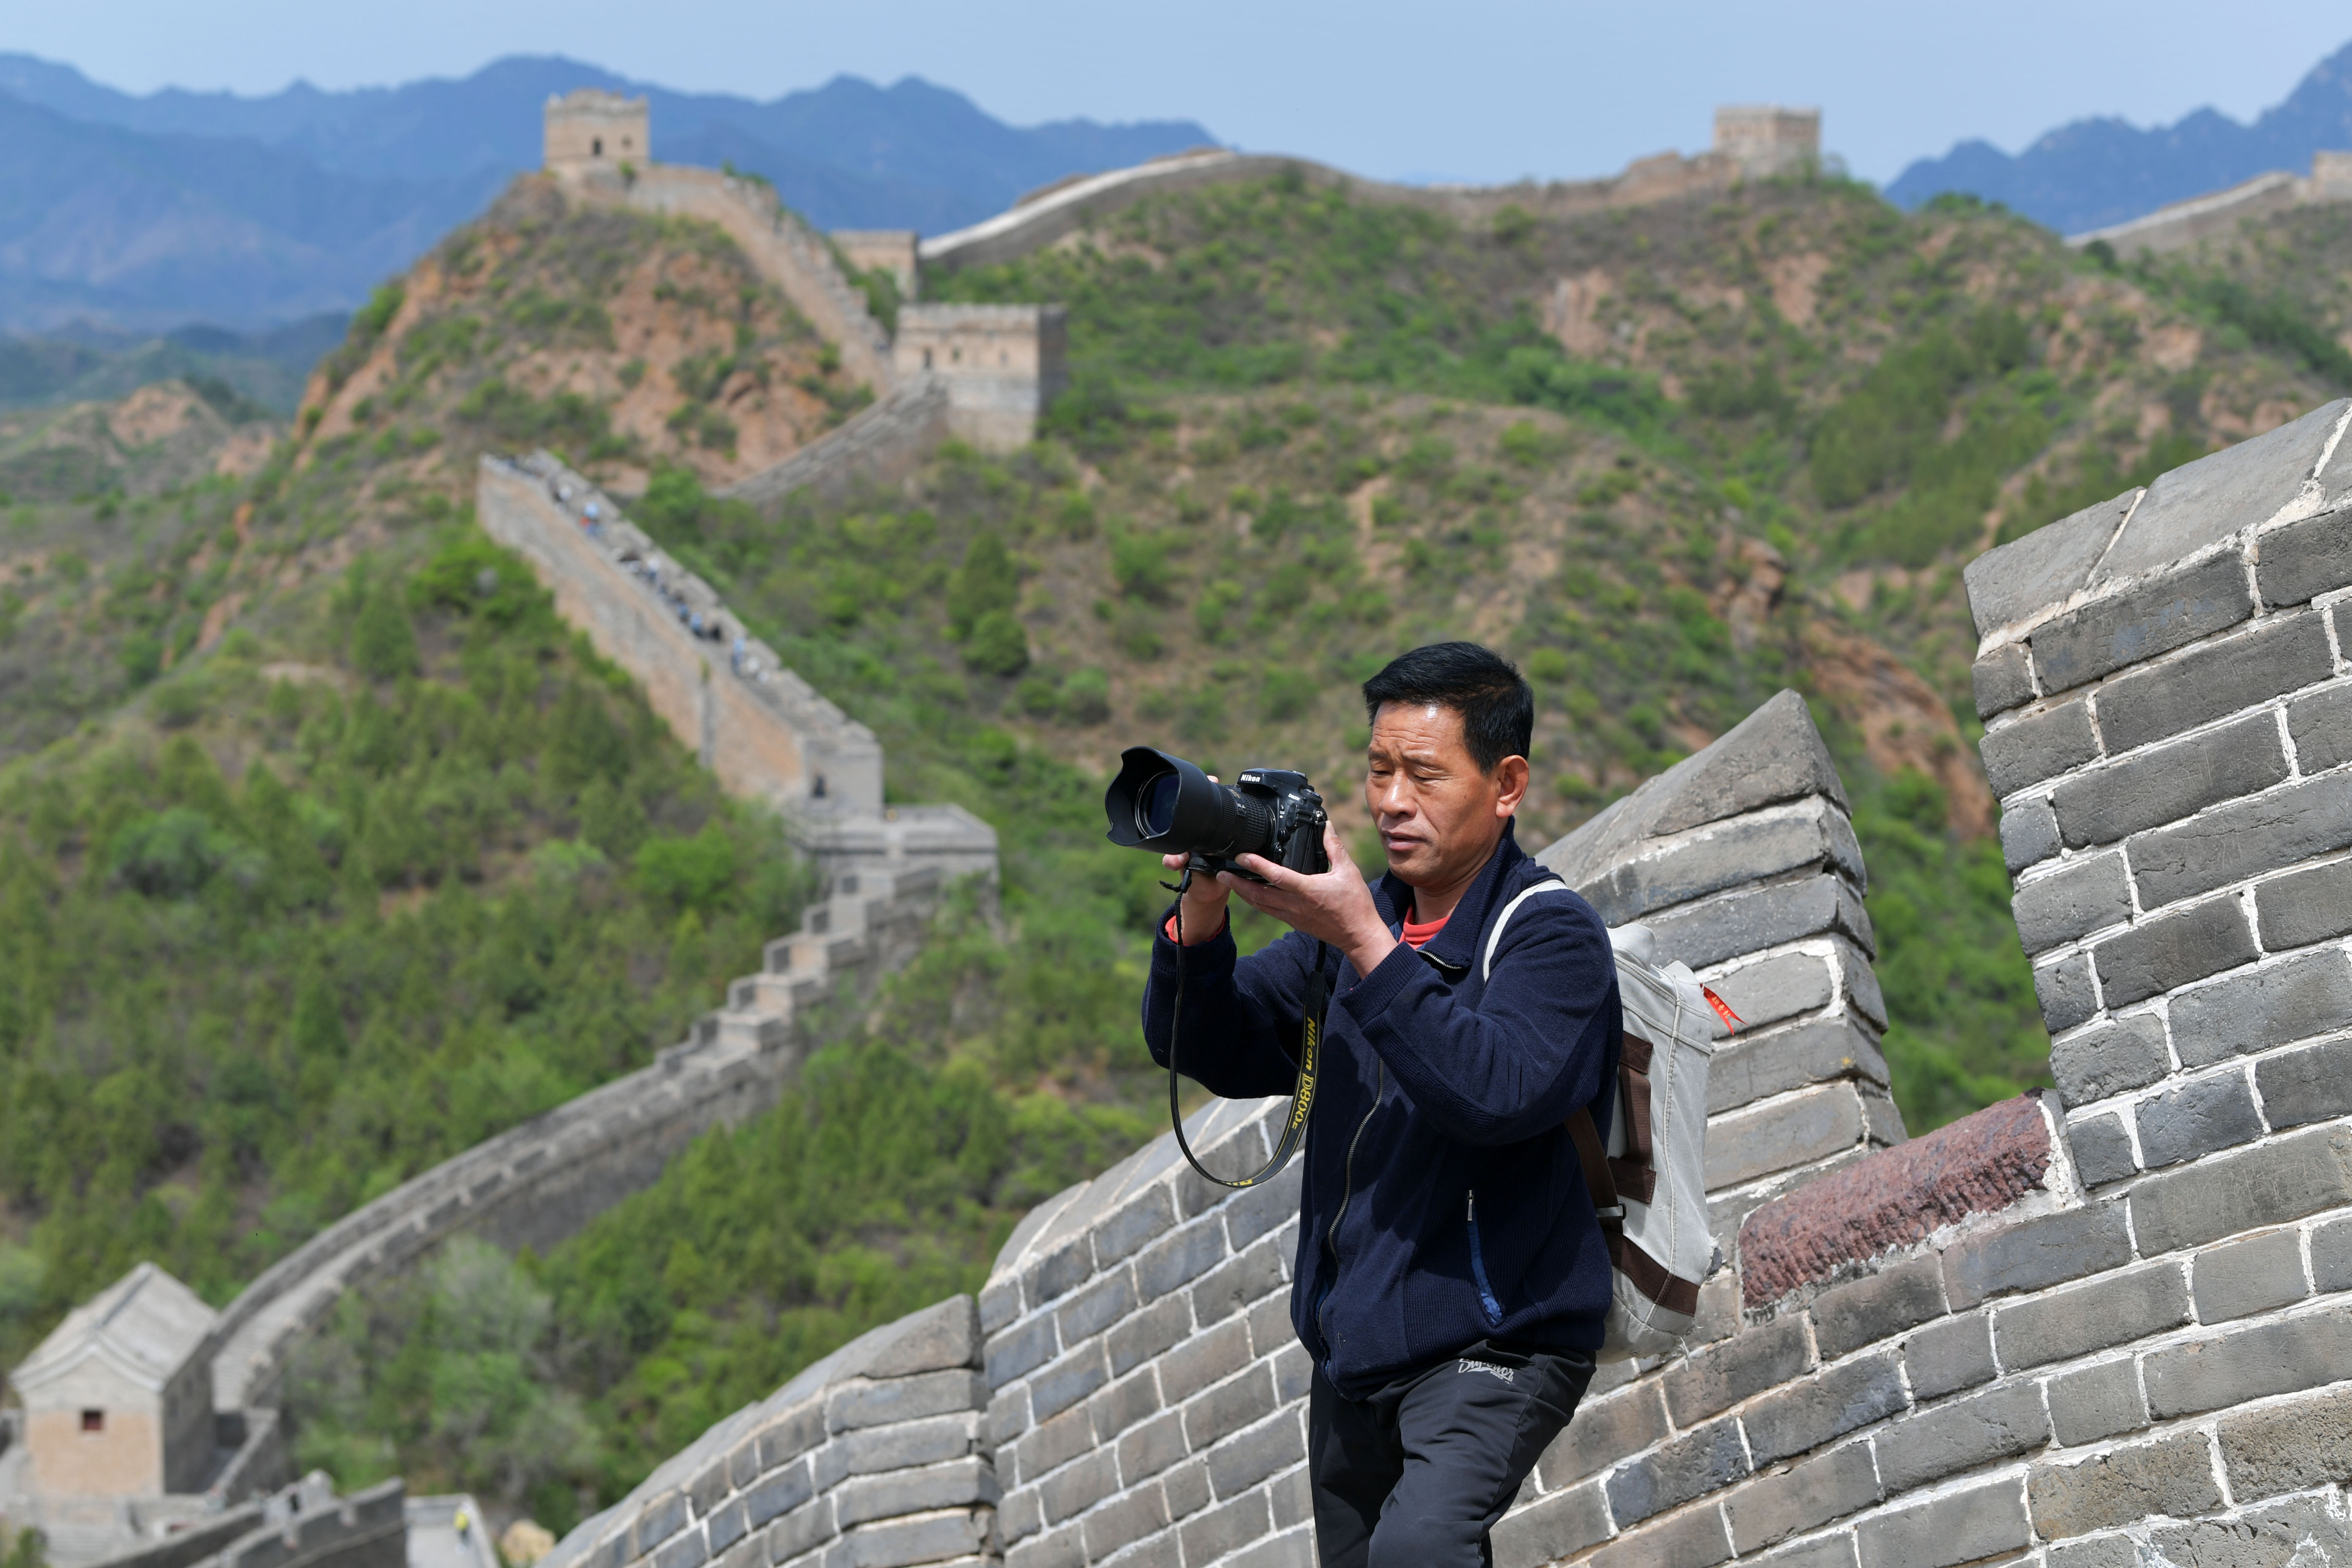 Zhou Wanping has been taking photos of the Great Wall for decades. / CNSPHOTO